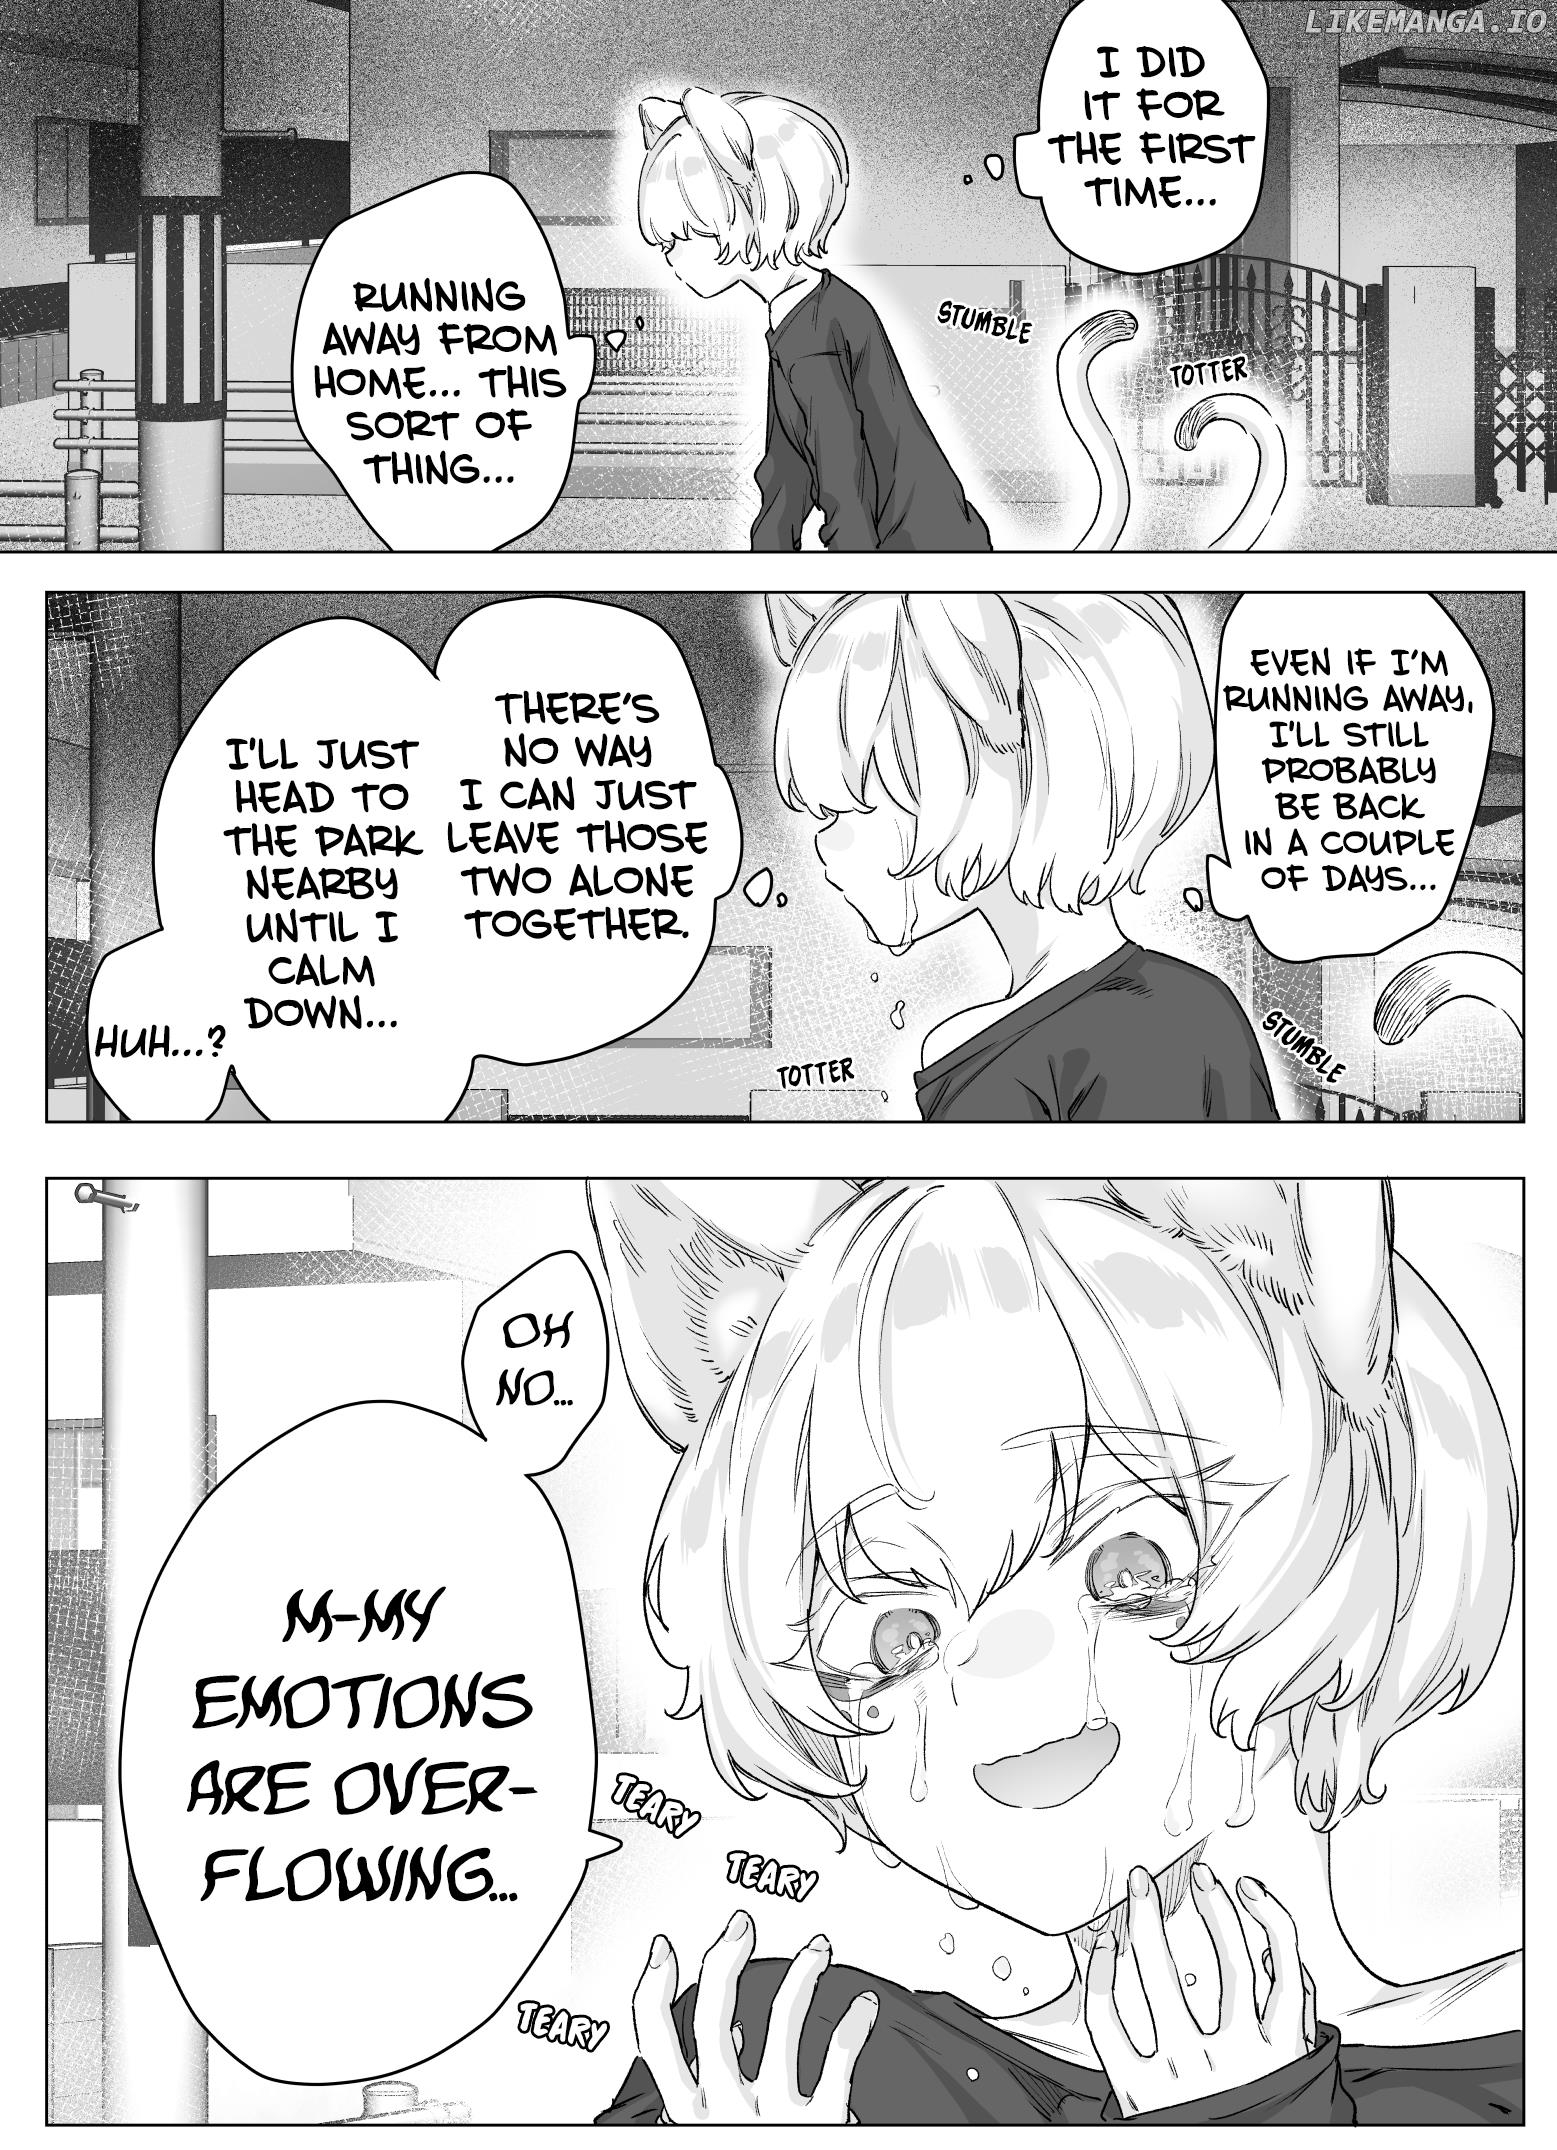 Even Though She's The Losing Heroine, The Bakeneko-Chan Remains Undaunted Chapter 14 - page 1